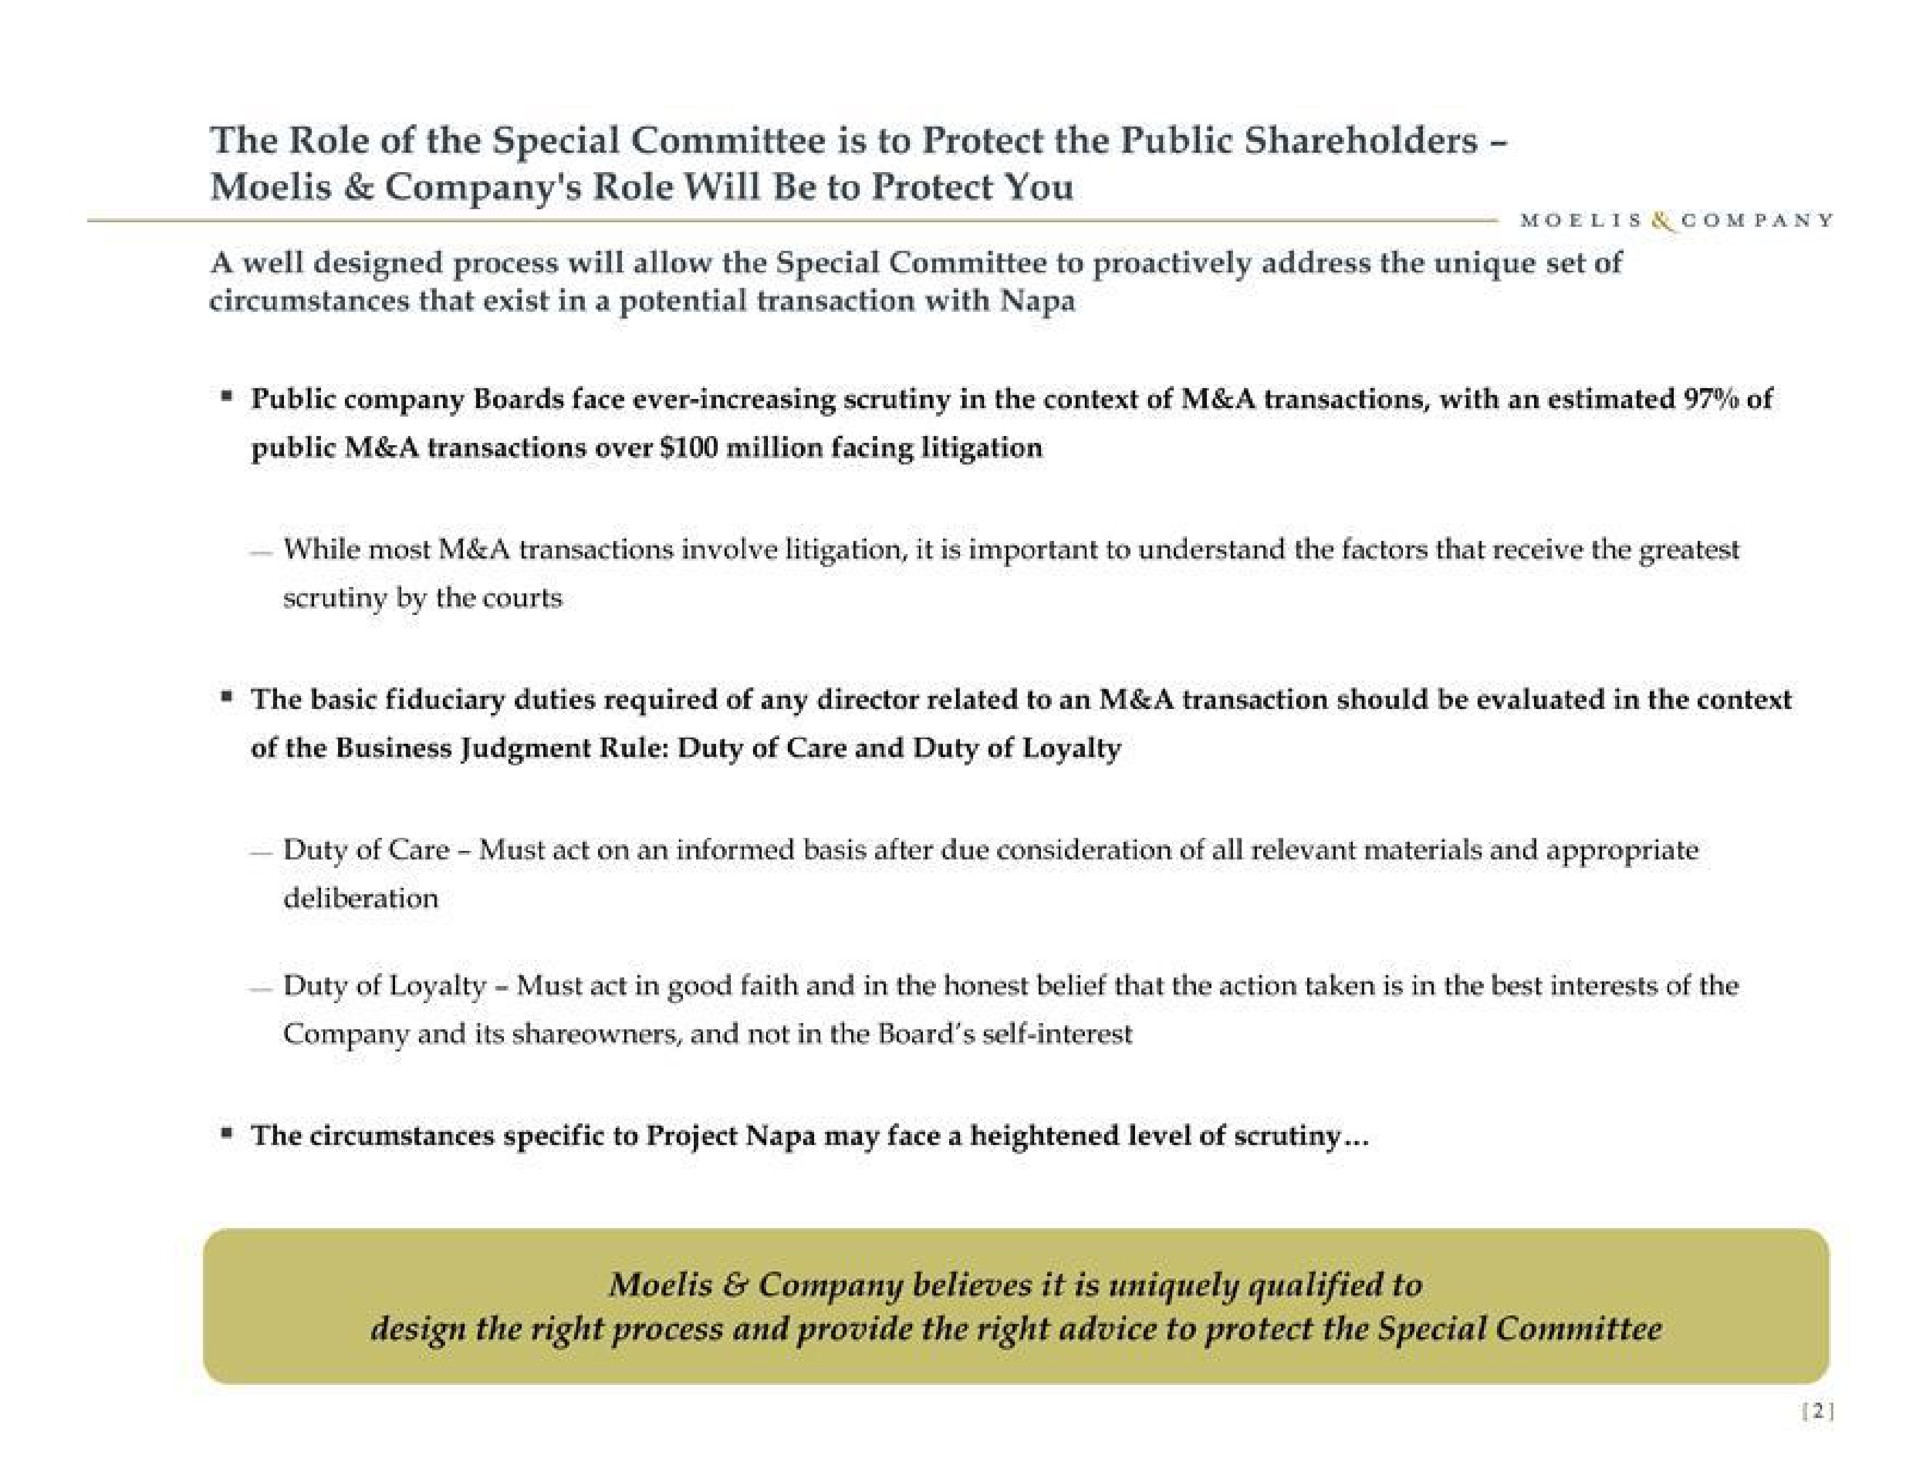 the role of the special committee is to protect the public shareholders company role will be to protect you a well designed process will allow the special committee to address the unique set of public company boards face ever increasing scrutiny in the context of a transactions with an estimated of while most a transactions involve litigation it is important to understand the factors that receive the | Moelis & Company